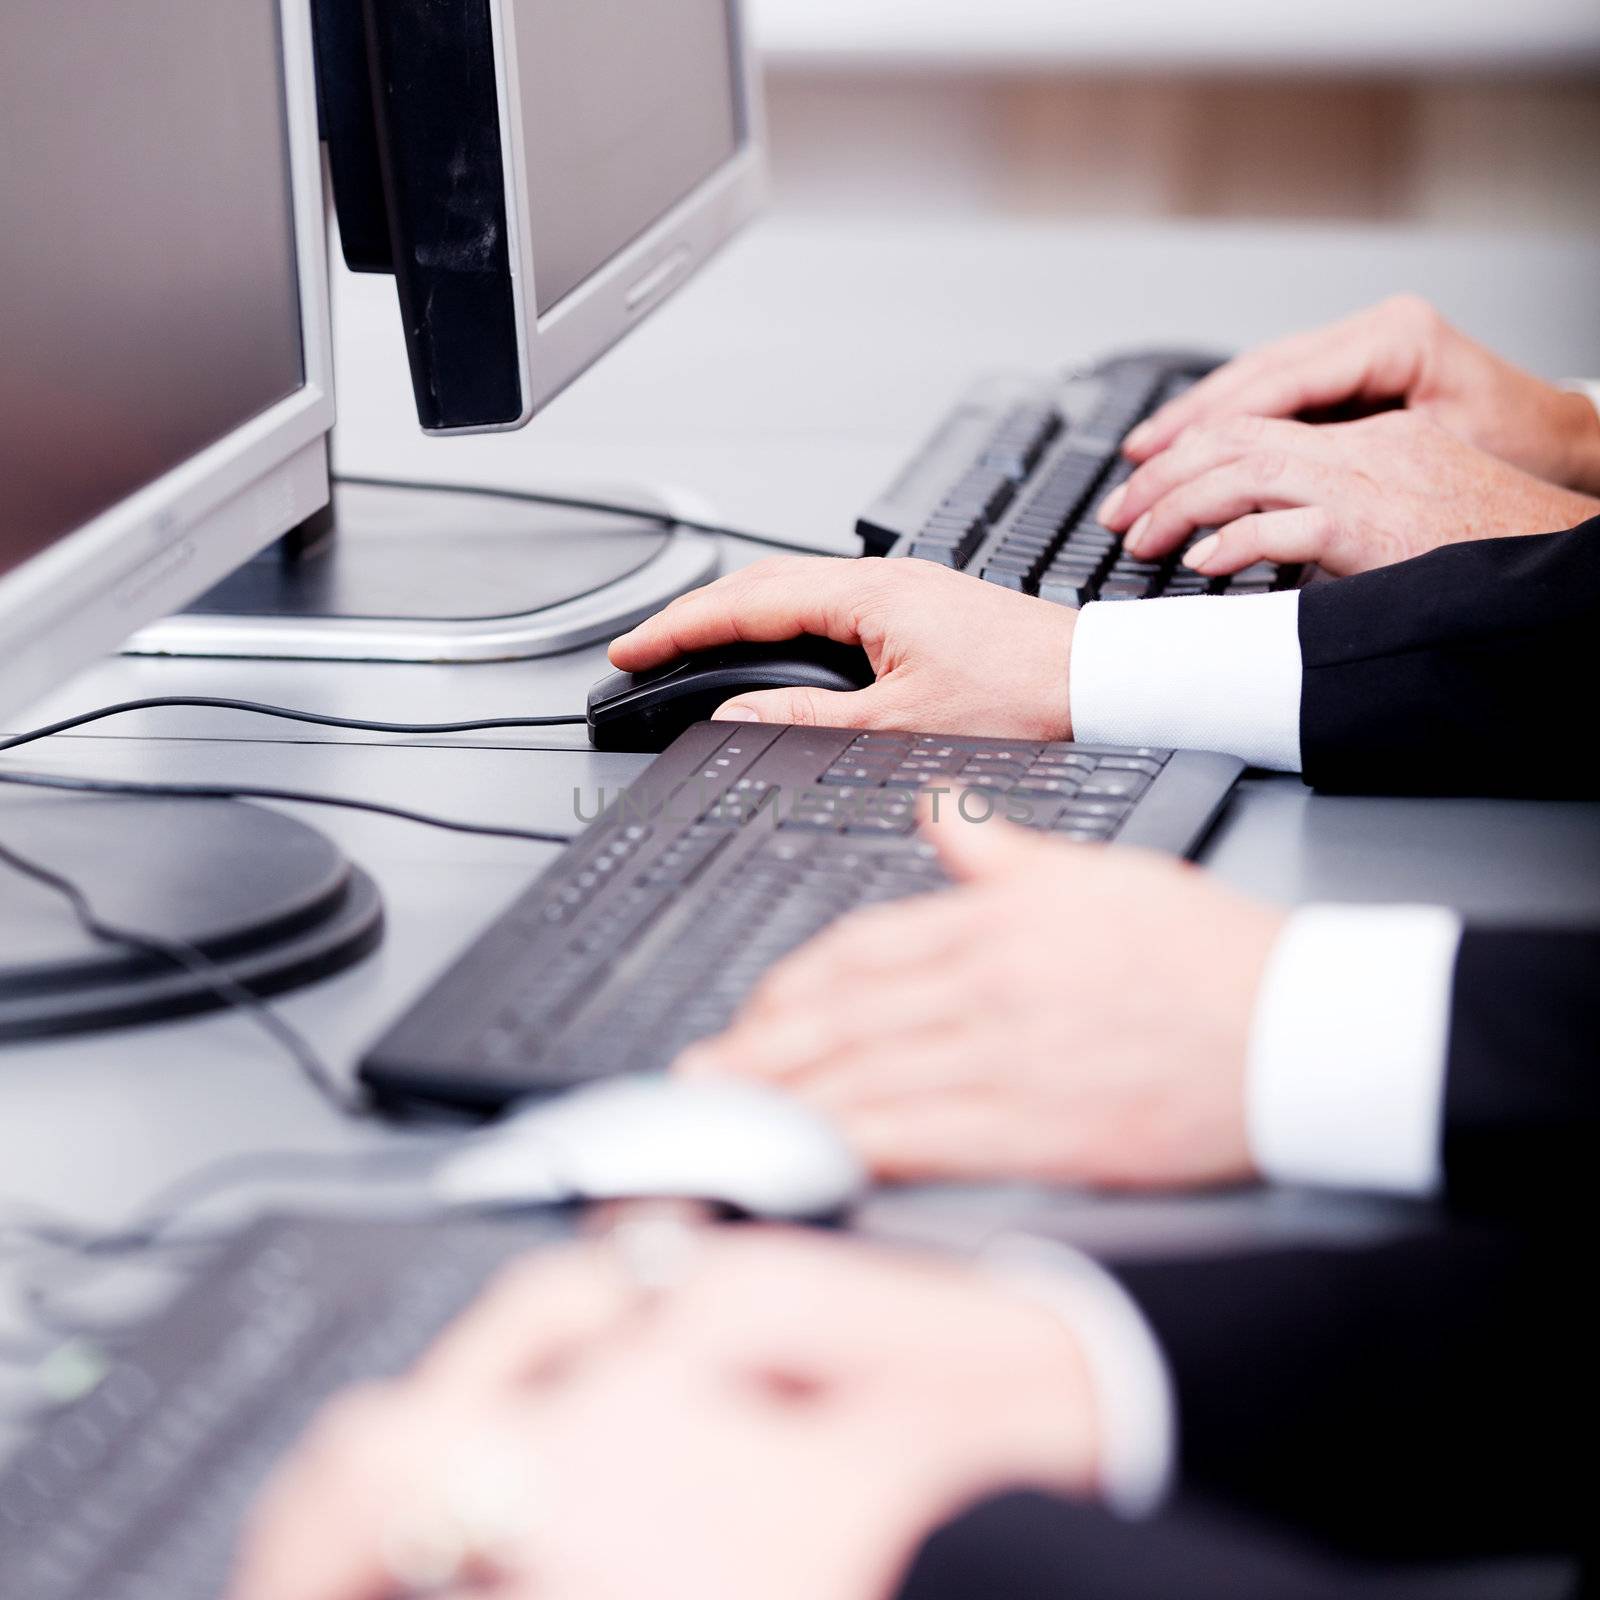 male hand on keyboard typing and scroll mouse on office desk